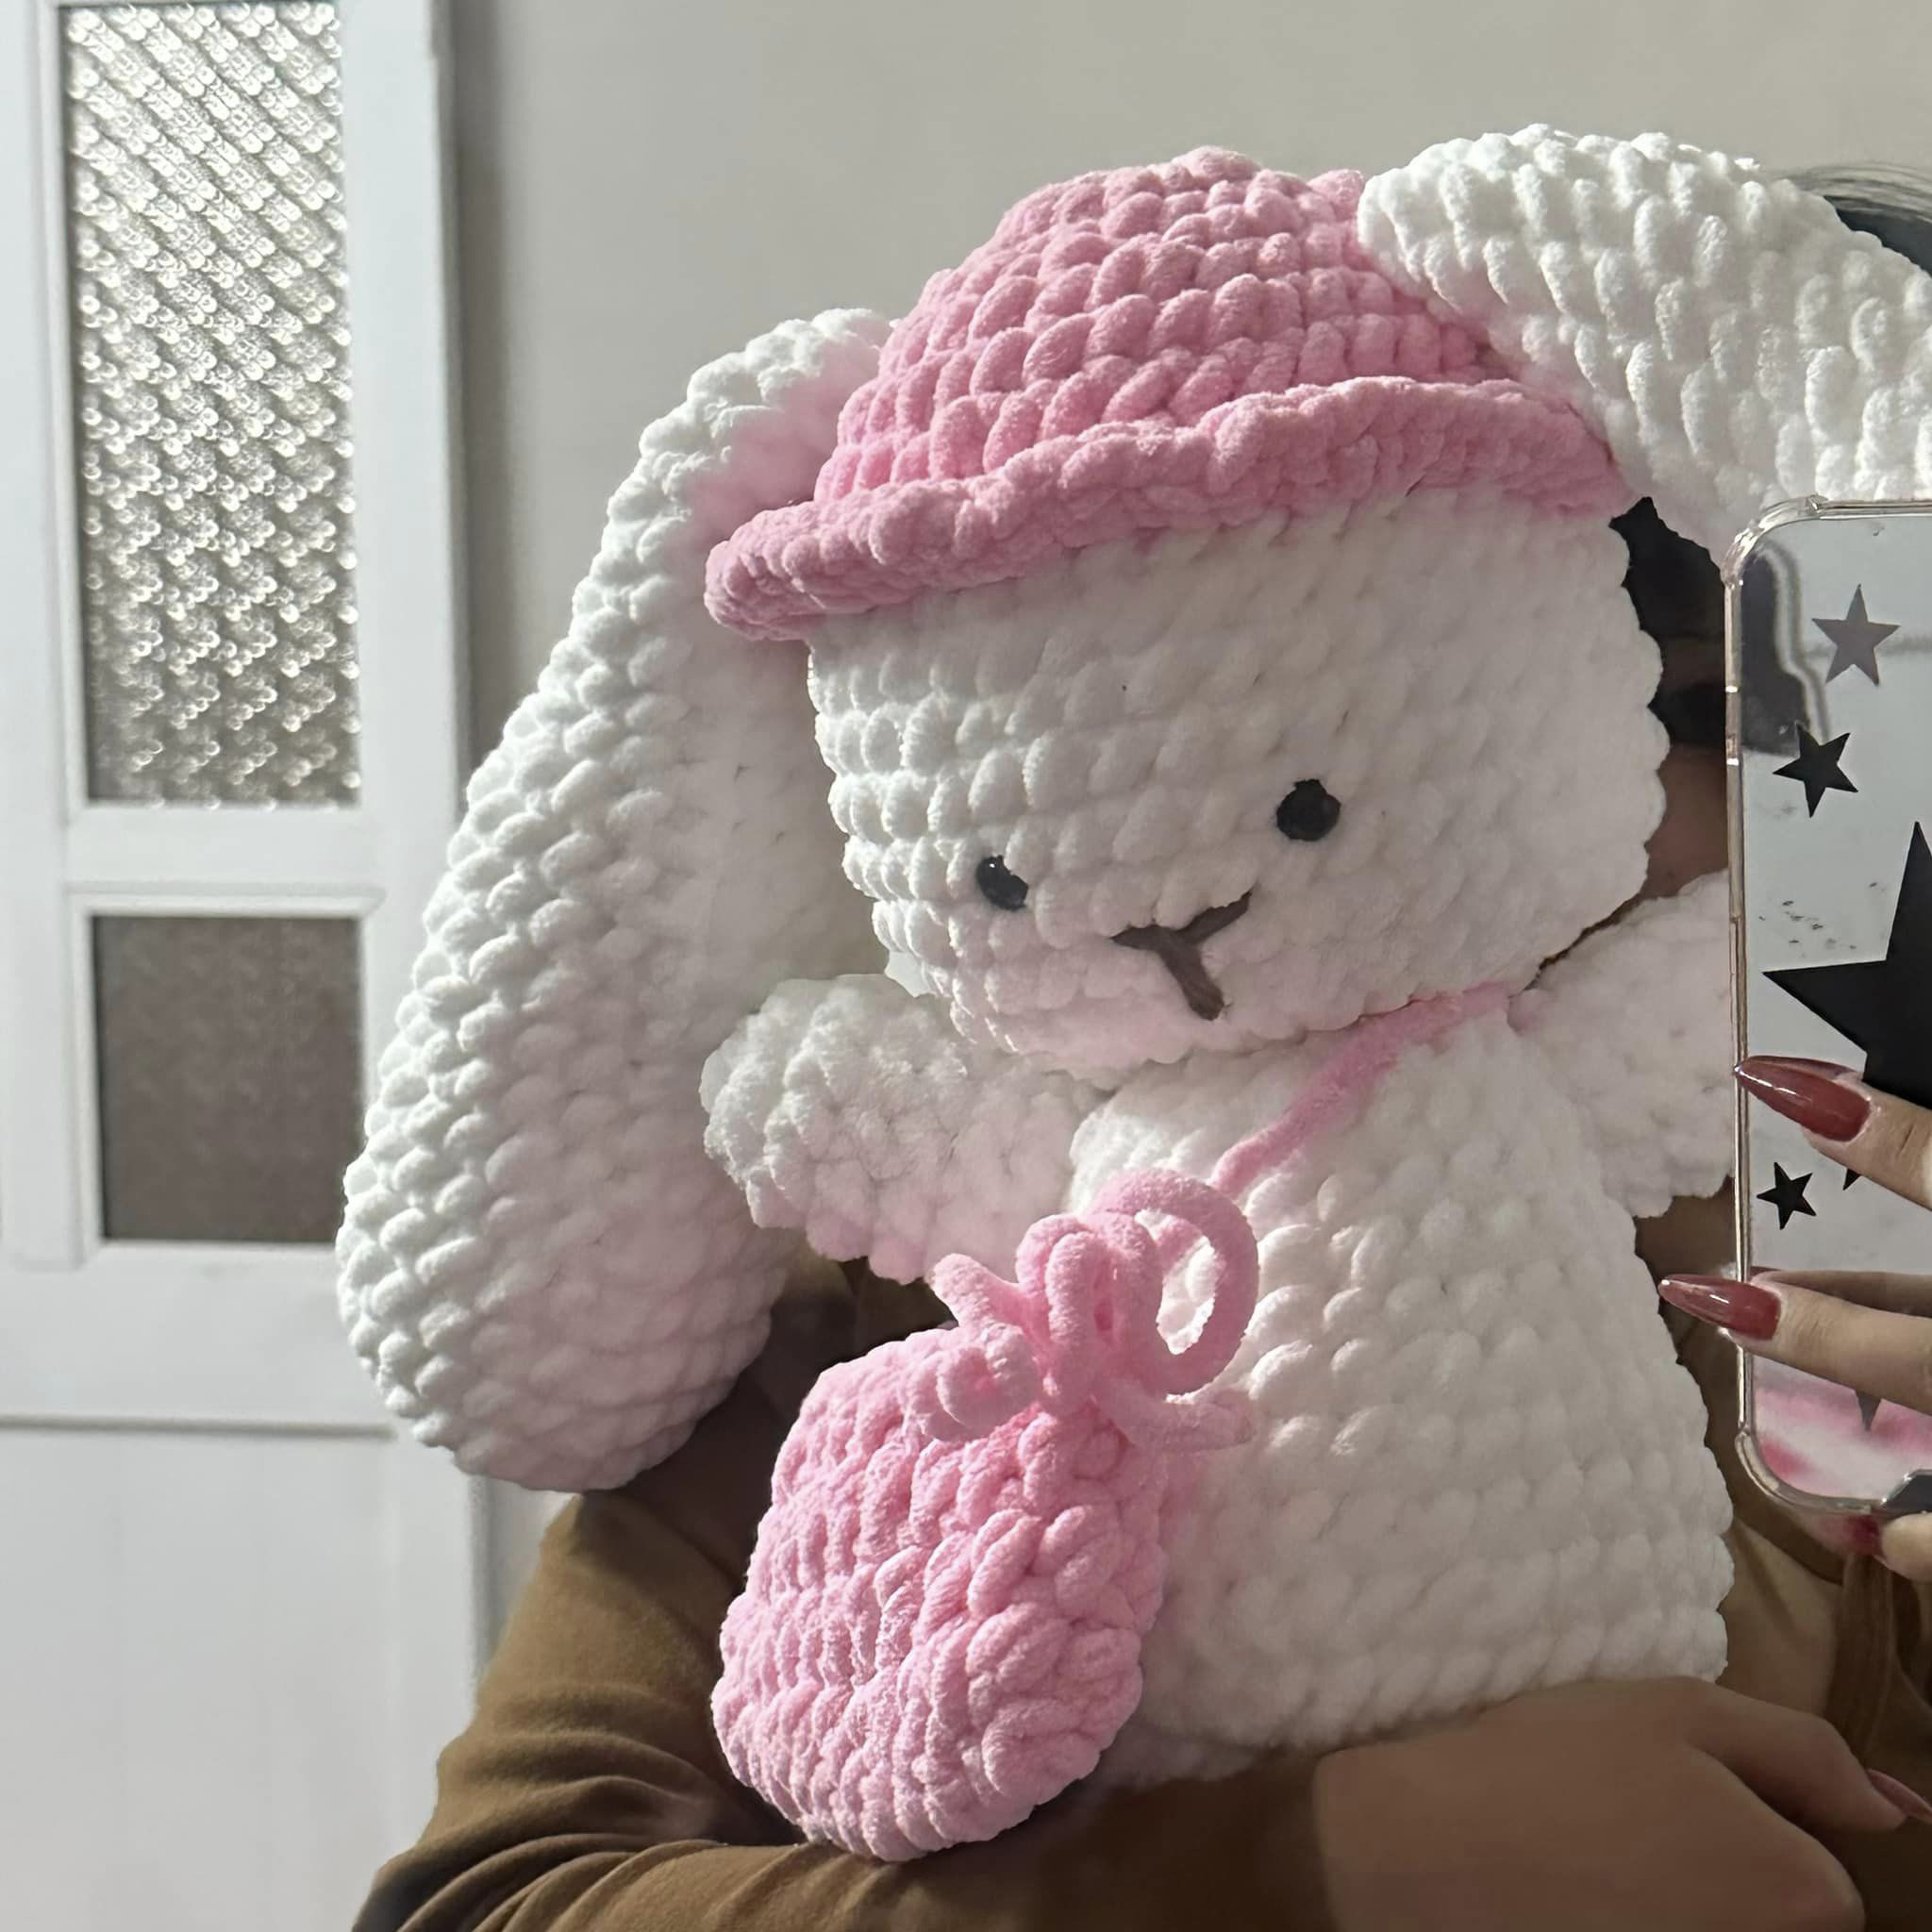 Handmade Cute Pink and White Crochet Teddy Bear – Perfect Gift for Kids